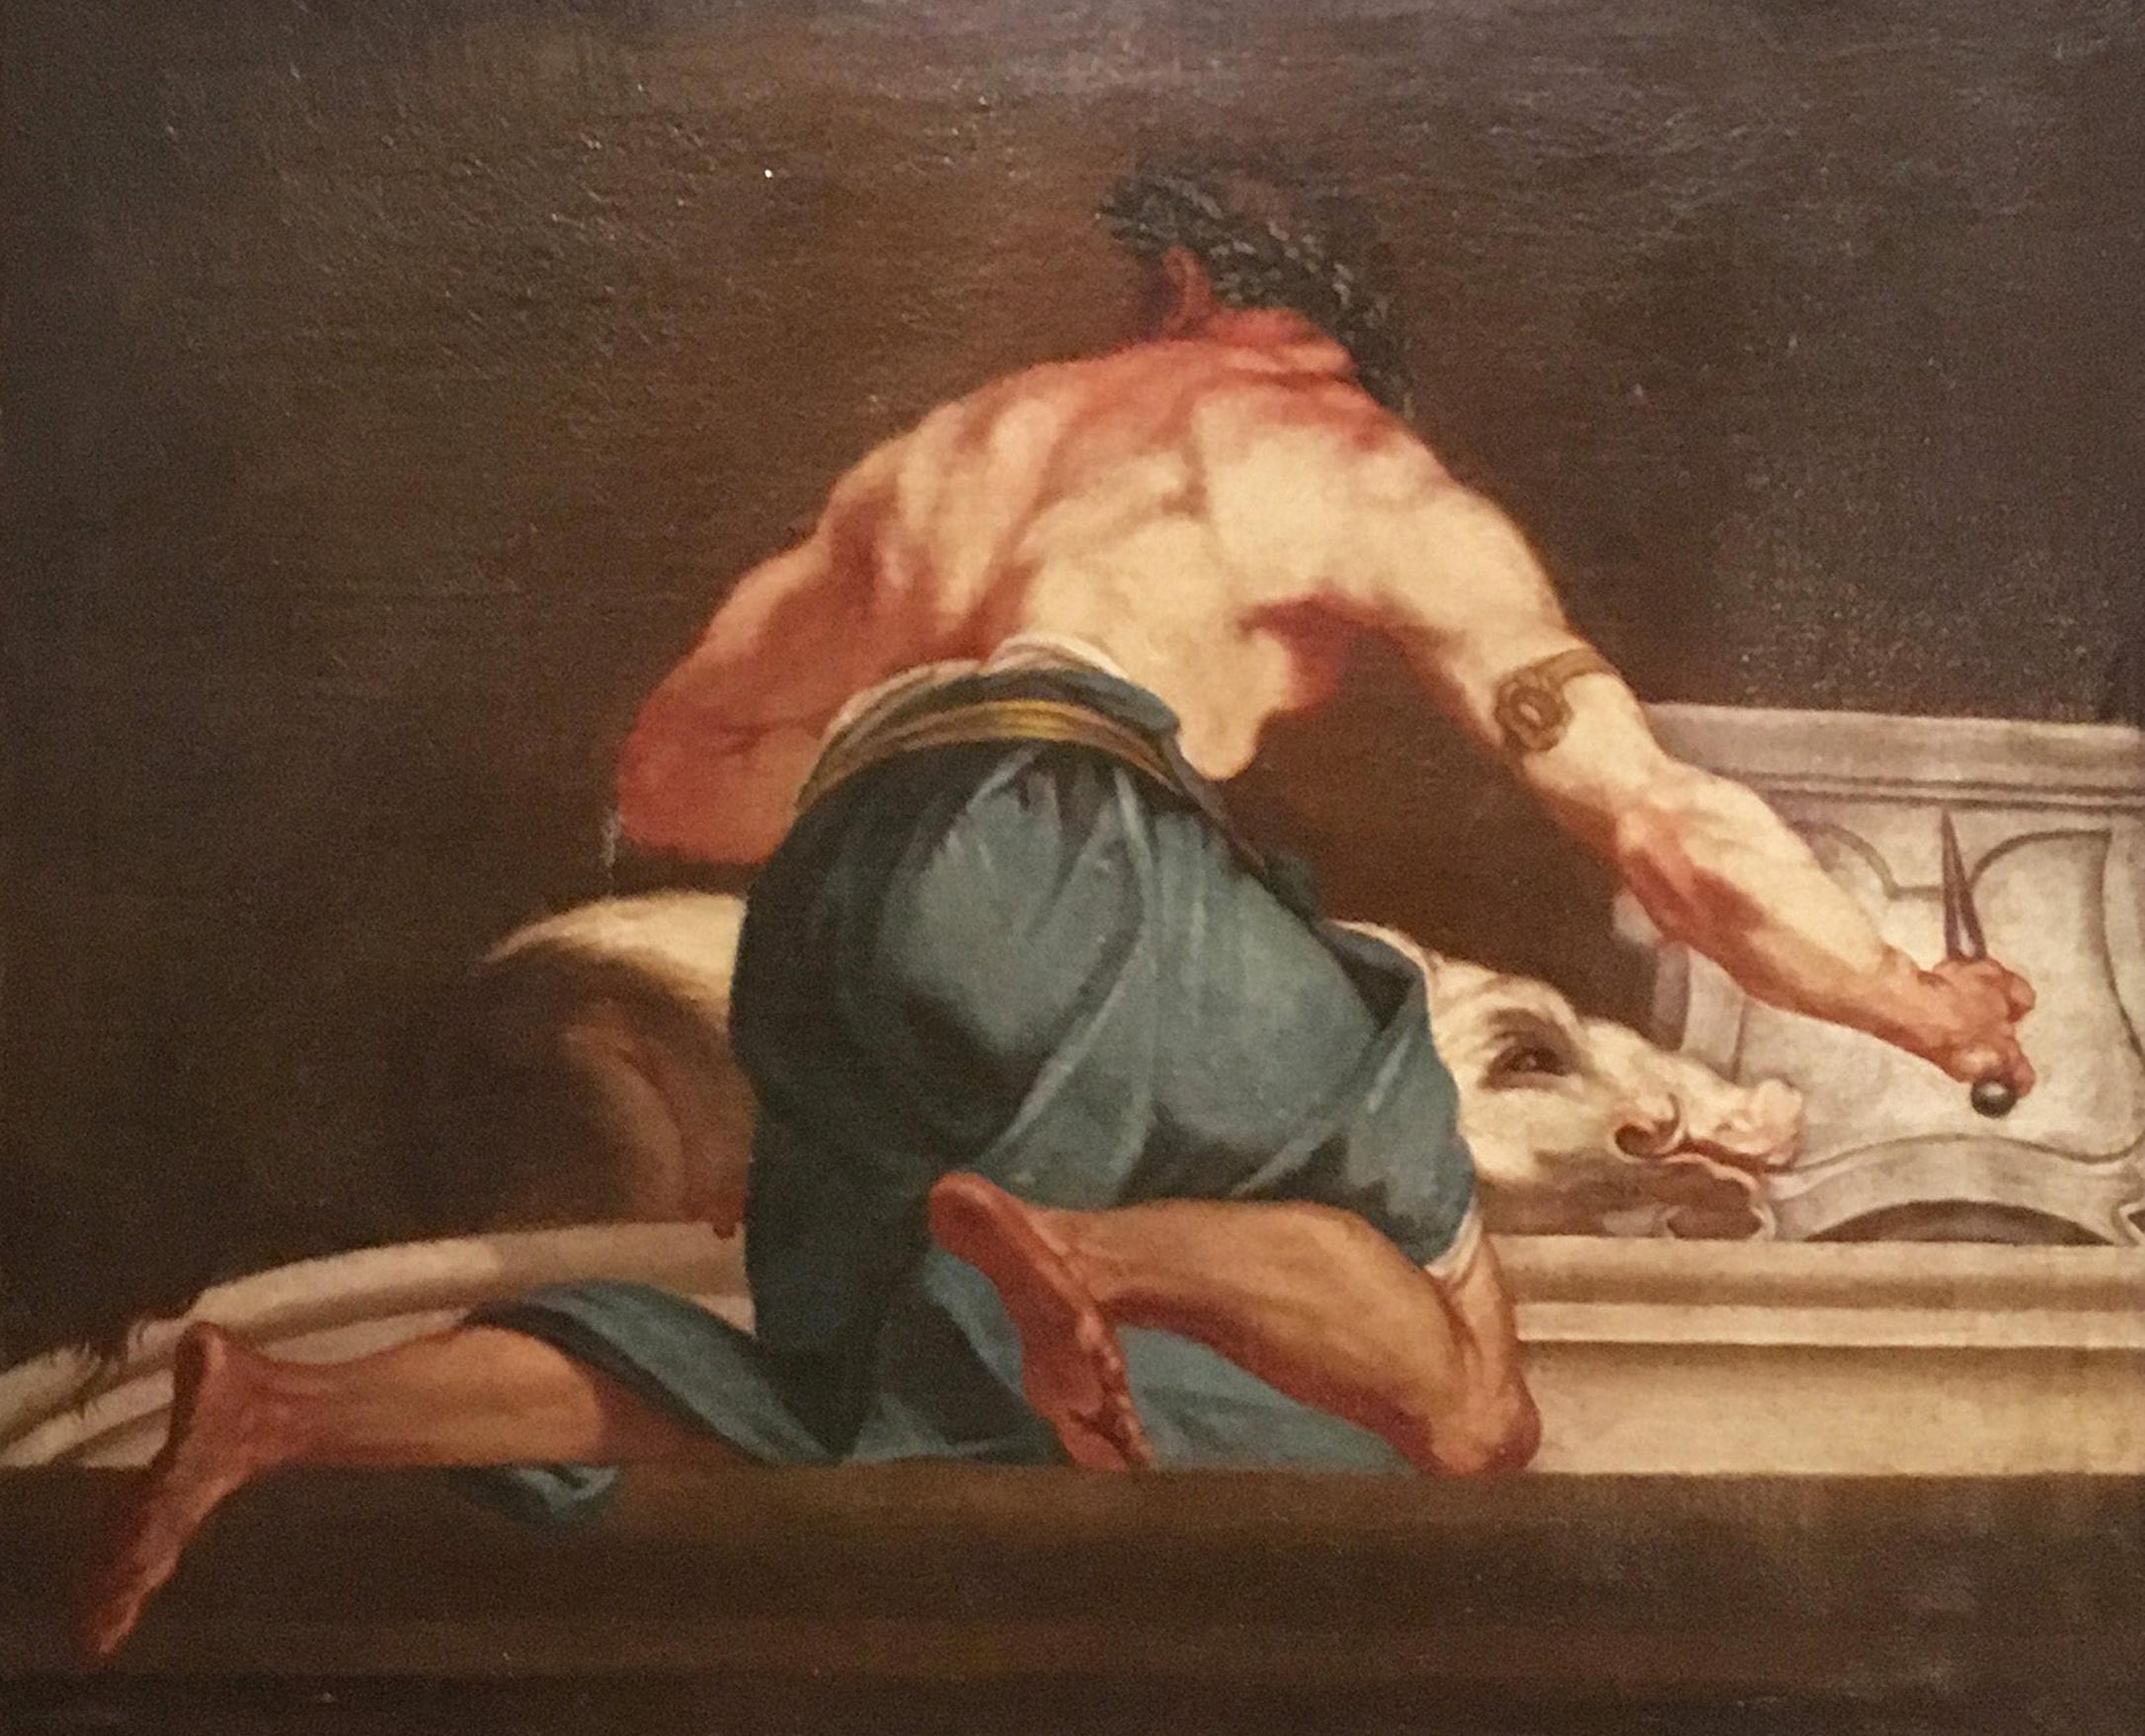 Oil on canvas painting depicting a mythological subject
By unknown artist
Italy, 18th century

Dimensions with frame: 85 x 74 x 5 cm
Dimensions without frame: 73 x 61.5 x 2 cm.